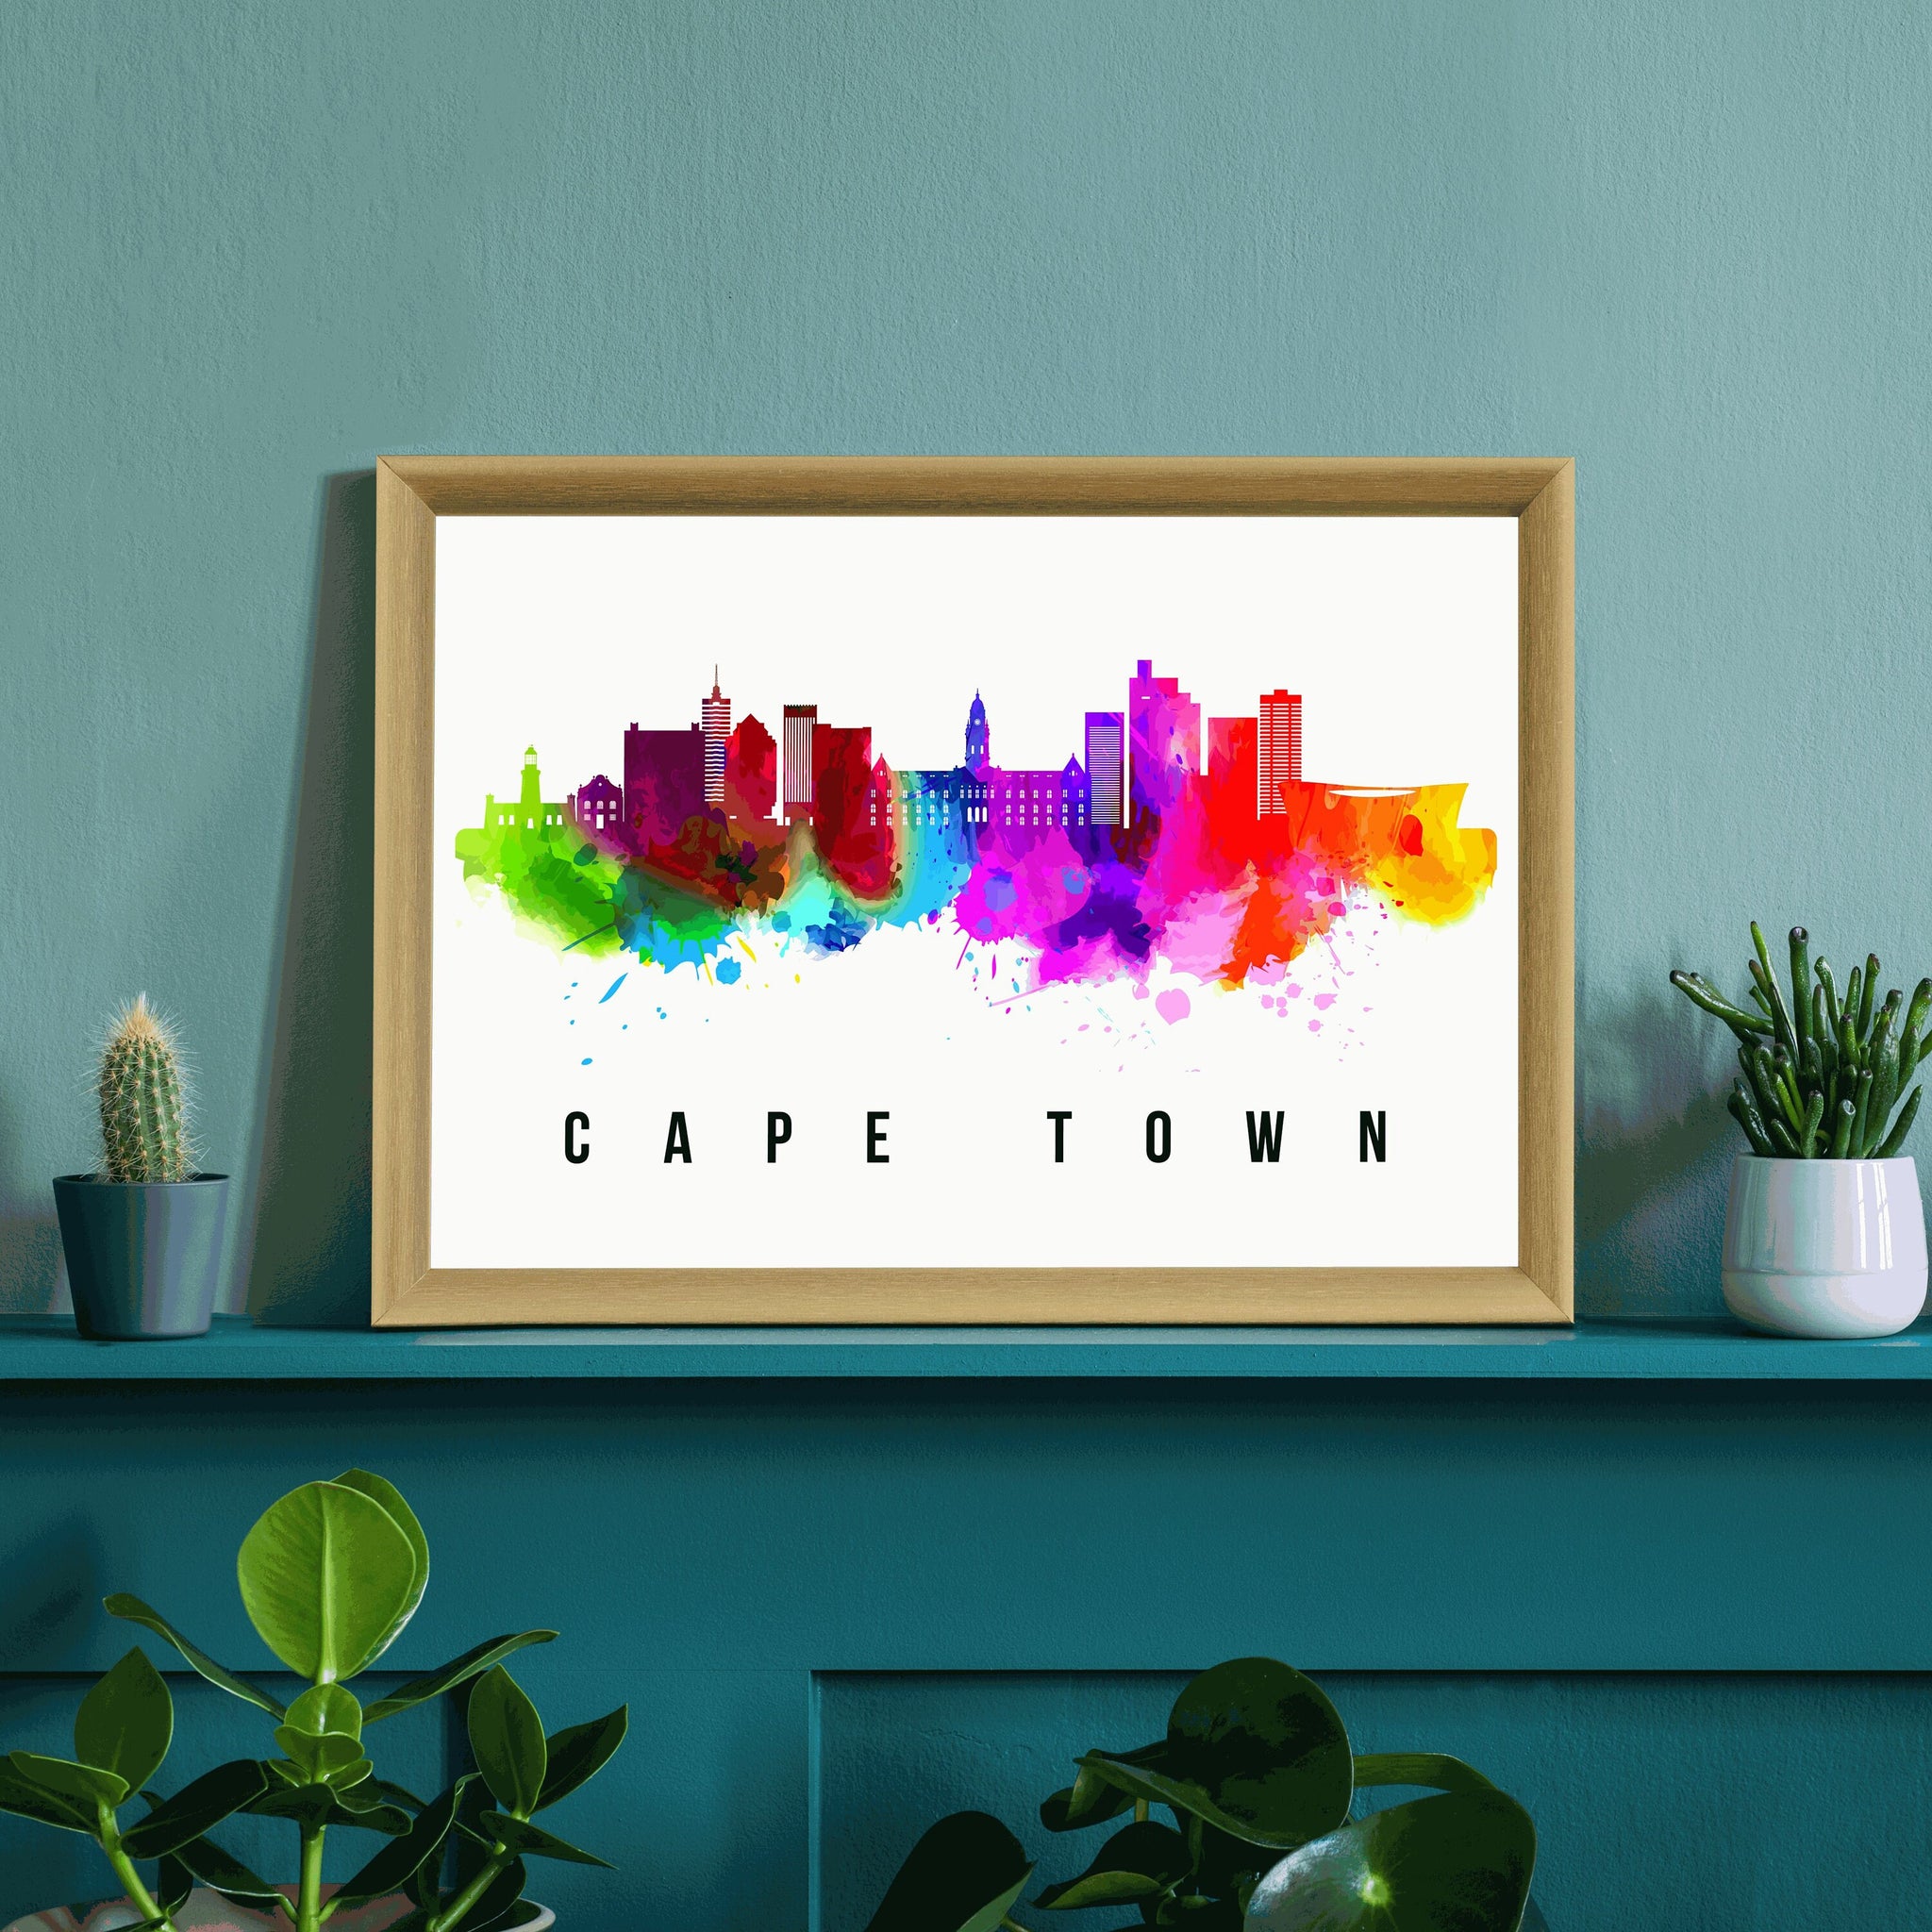 CAPETOWN - SOUTH AFRICA Poster,  Skyline Poster Cityscape and Landmark Print, Capetown Illustration Home Wall Art, Office Wall Decor